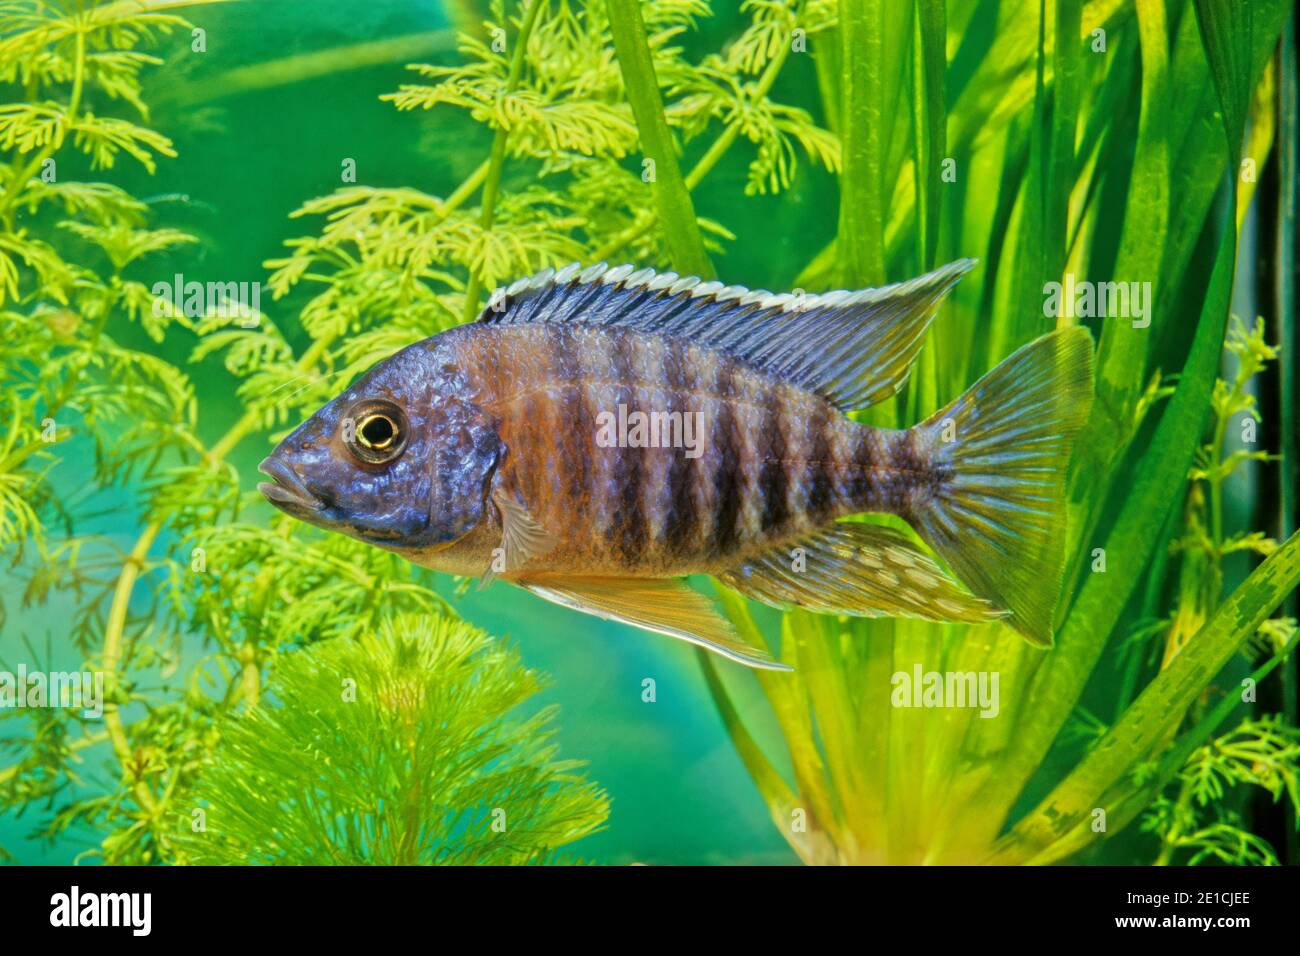 Aulonocara nyassae, known as the emperor cichlid, is a species of haplochromine Cichlid that is endemic to Lake Malawi in Africa. Stock Photo